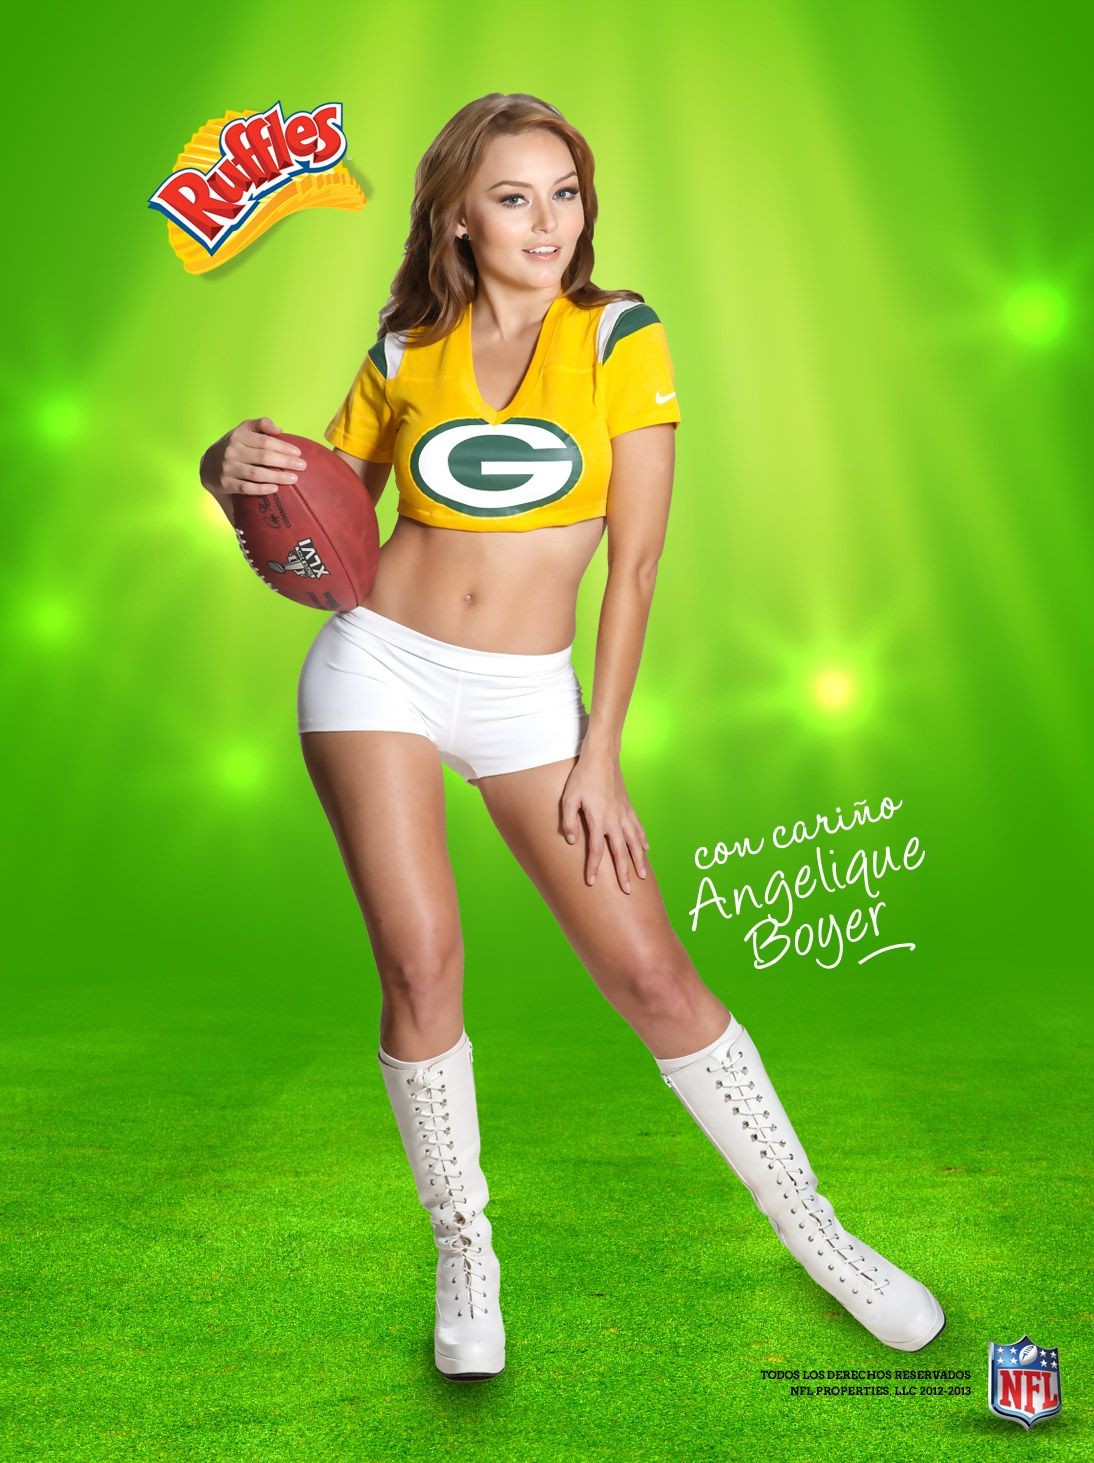 Angelique Boyer trägt sexy Trikot Look-alike Outfits in nfl Promos
 #75243013